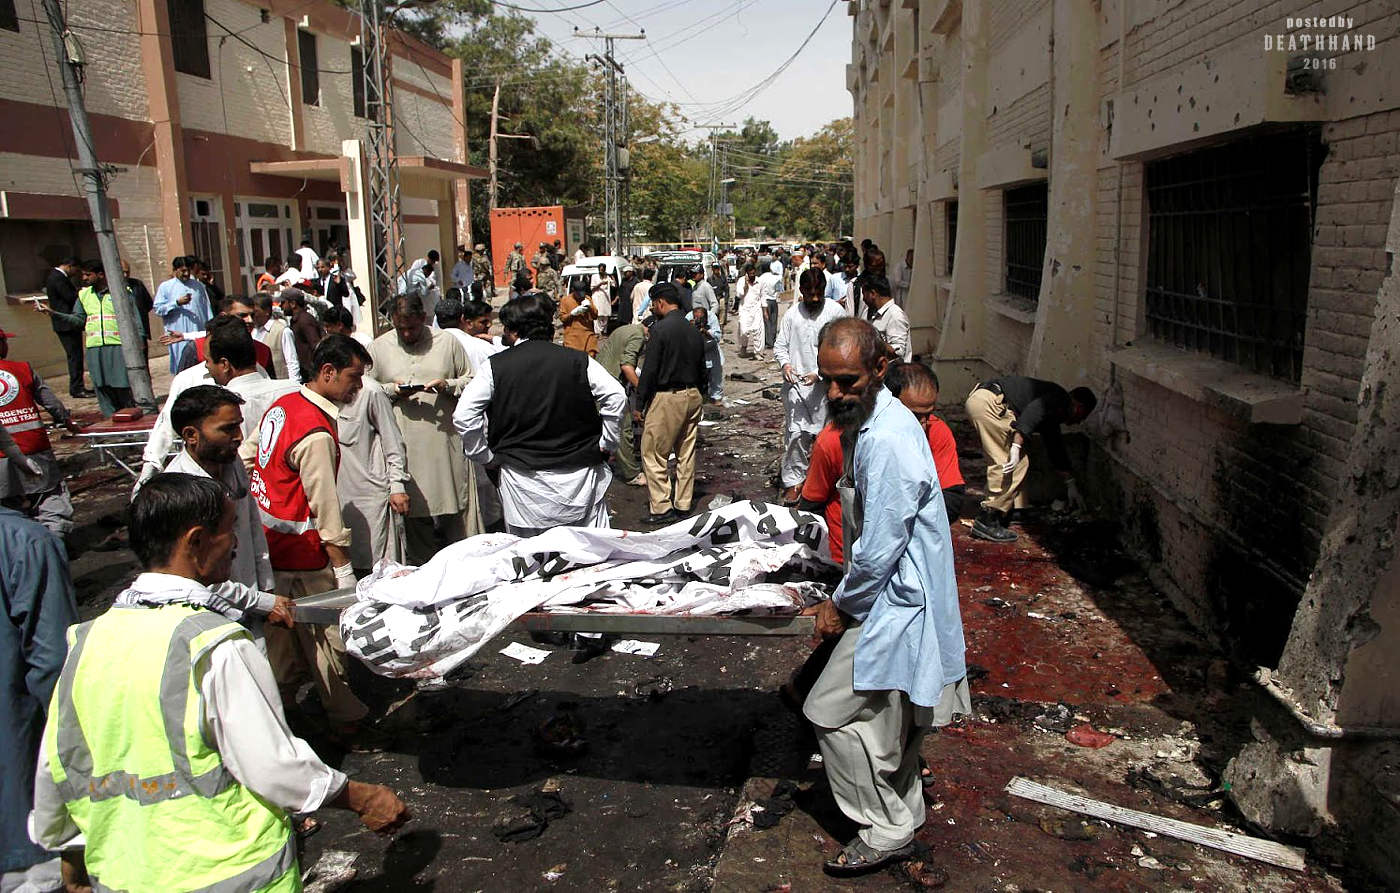 lawyer-killed-mourners-at-hospital-hit-by-suicide-bomber-15-Quetta-PK-aug-8-16.jpg